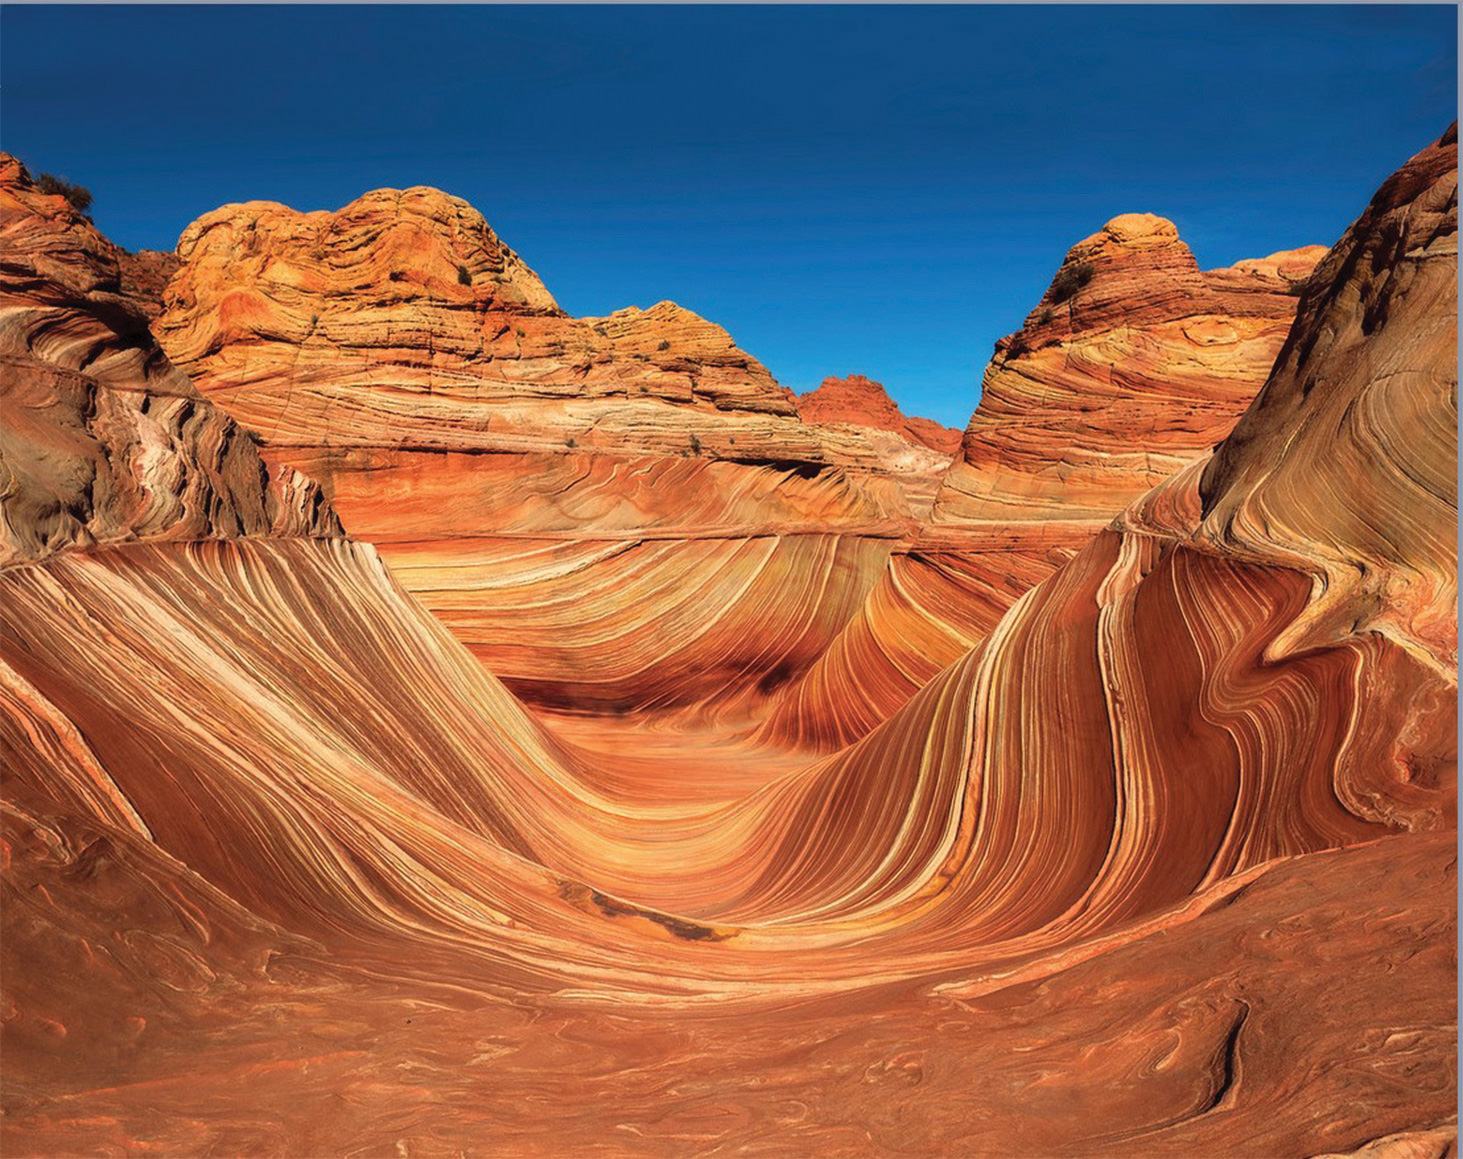 This picture of The Wave, in northern Arizona near Kanab, Utah, provides a beautiful example of Nic Stover’s photography featuring the Desert Southwest.